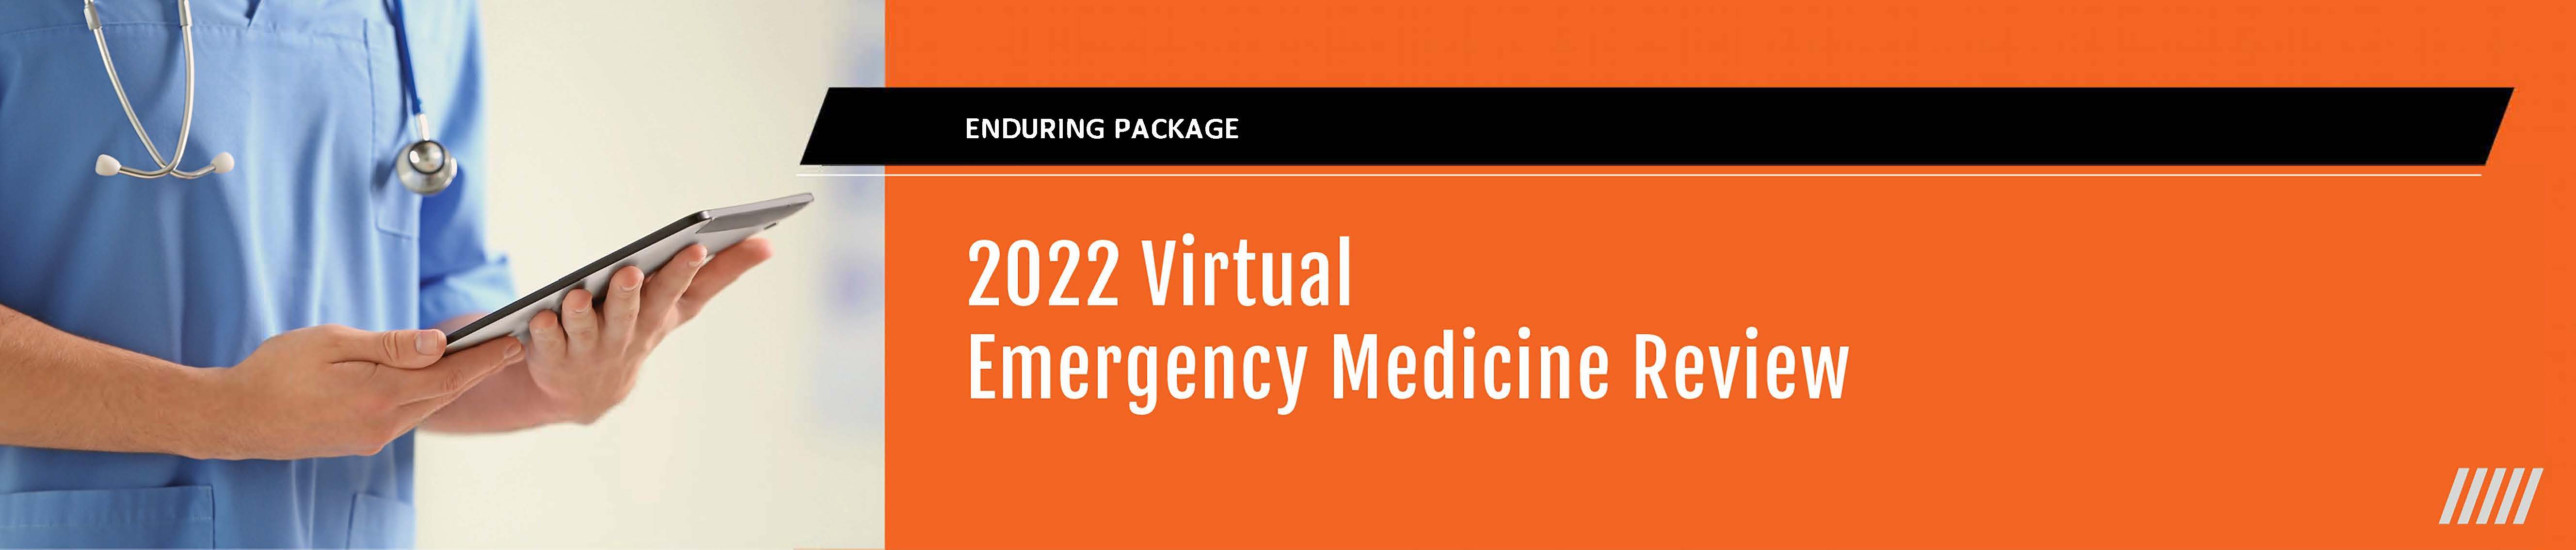 2022 Emergency Medicine Review - Enduring Package Banner